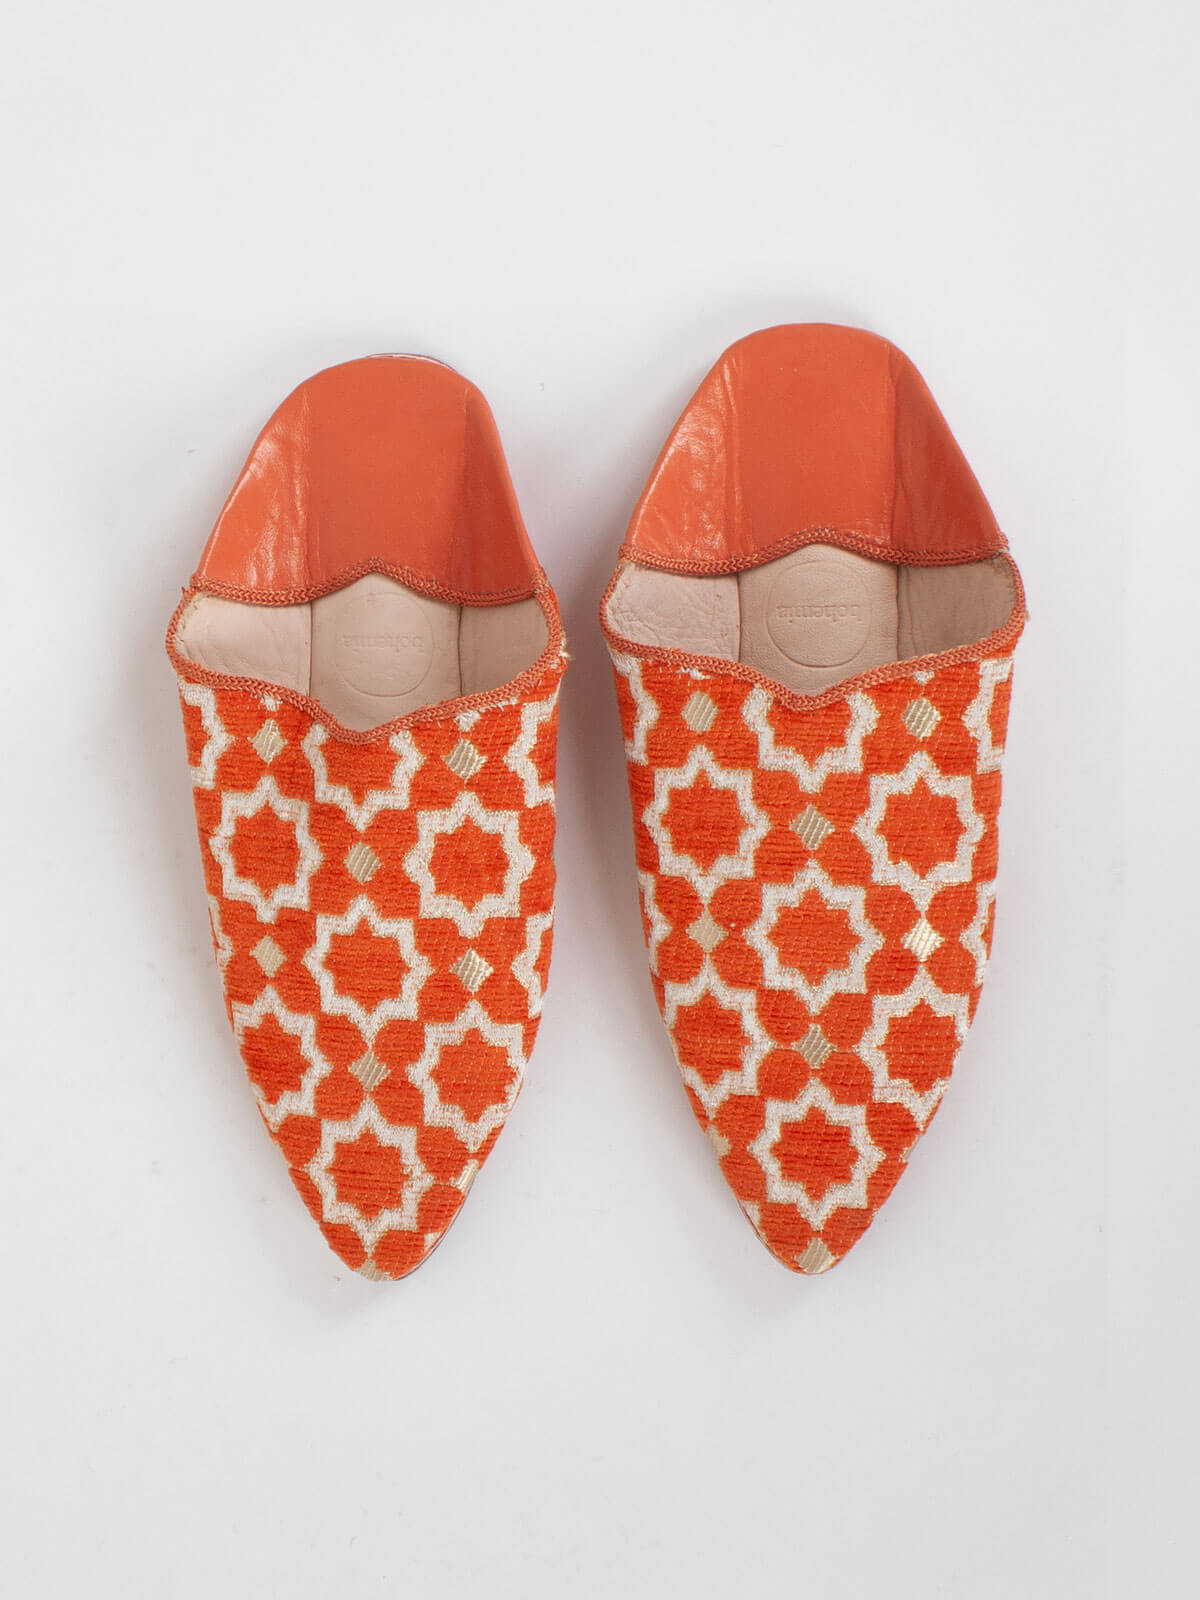 Moroccan Star Brocade Pointed Babouche Slippers, Orange